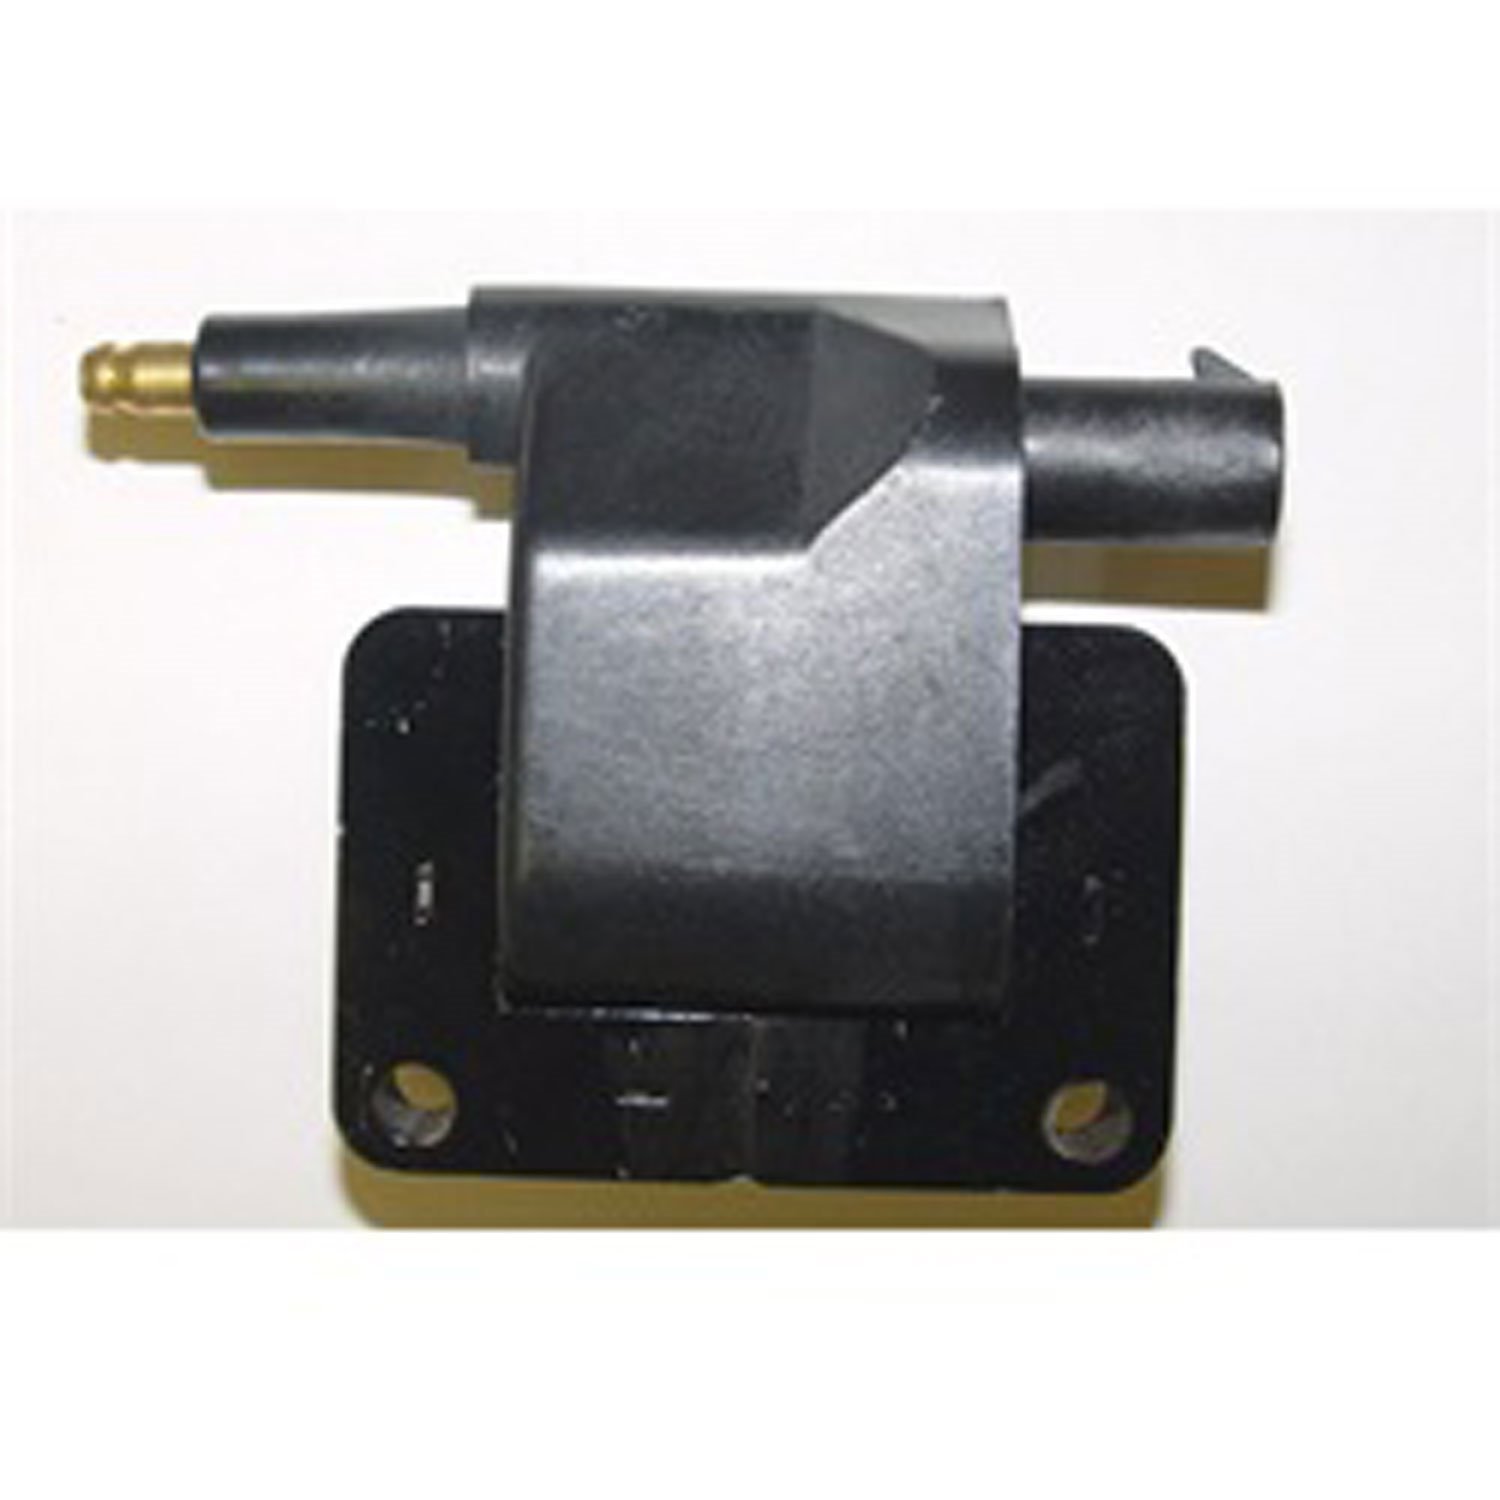 Ignition Coil 1991-1997 Wrangler 2.5L and 4.0L 1991-1997 Cherokee 2.5L and 4.0L 1993-1997 Grand Cherokee 4.0L and 5.2L